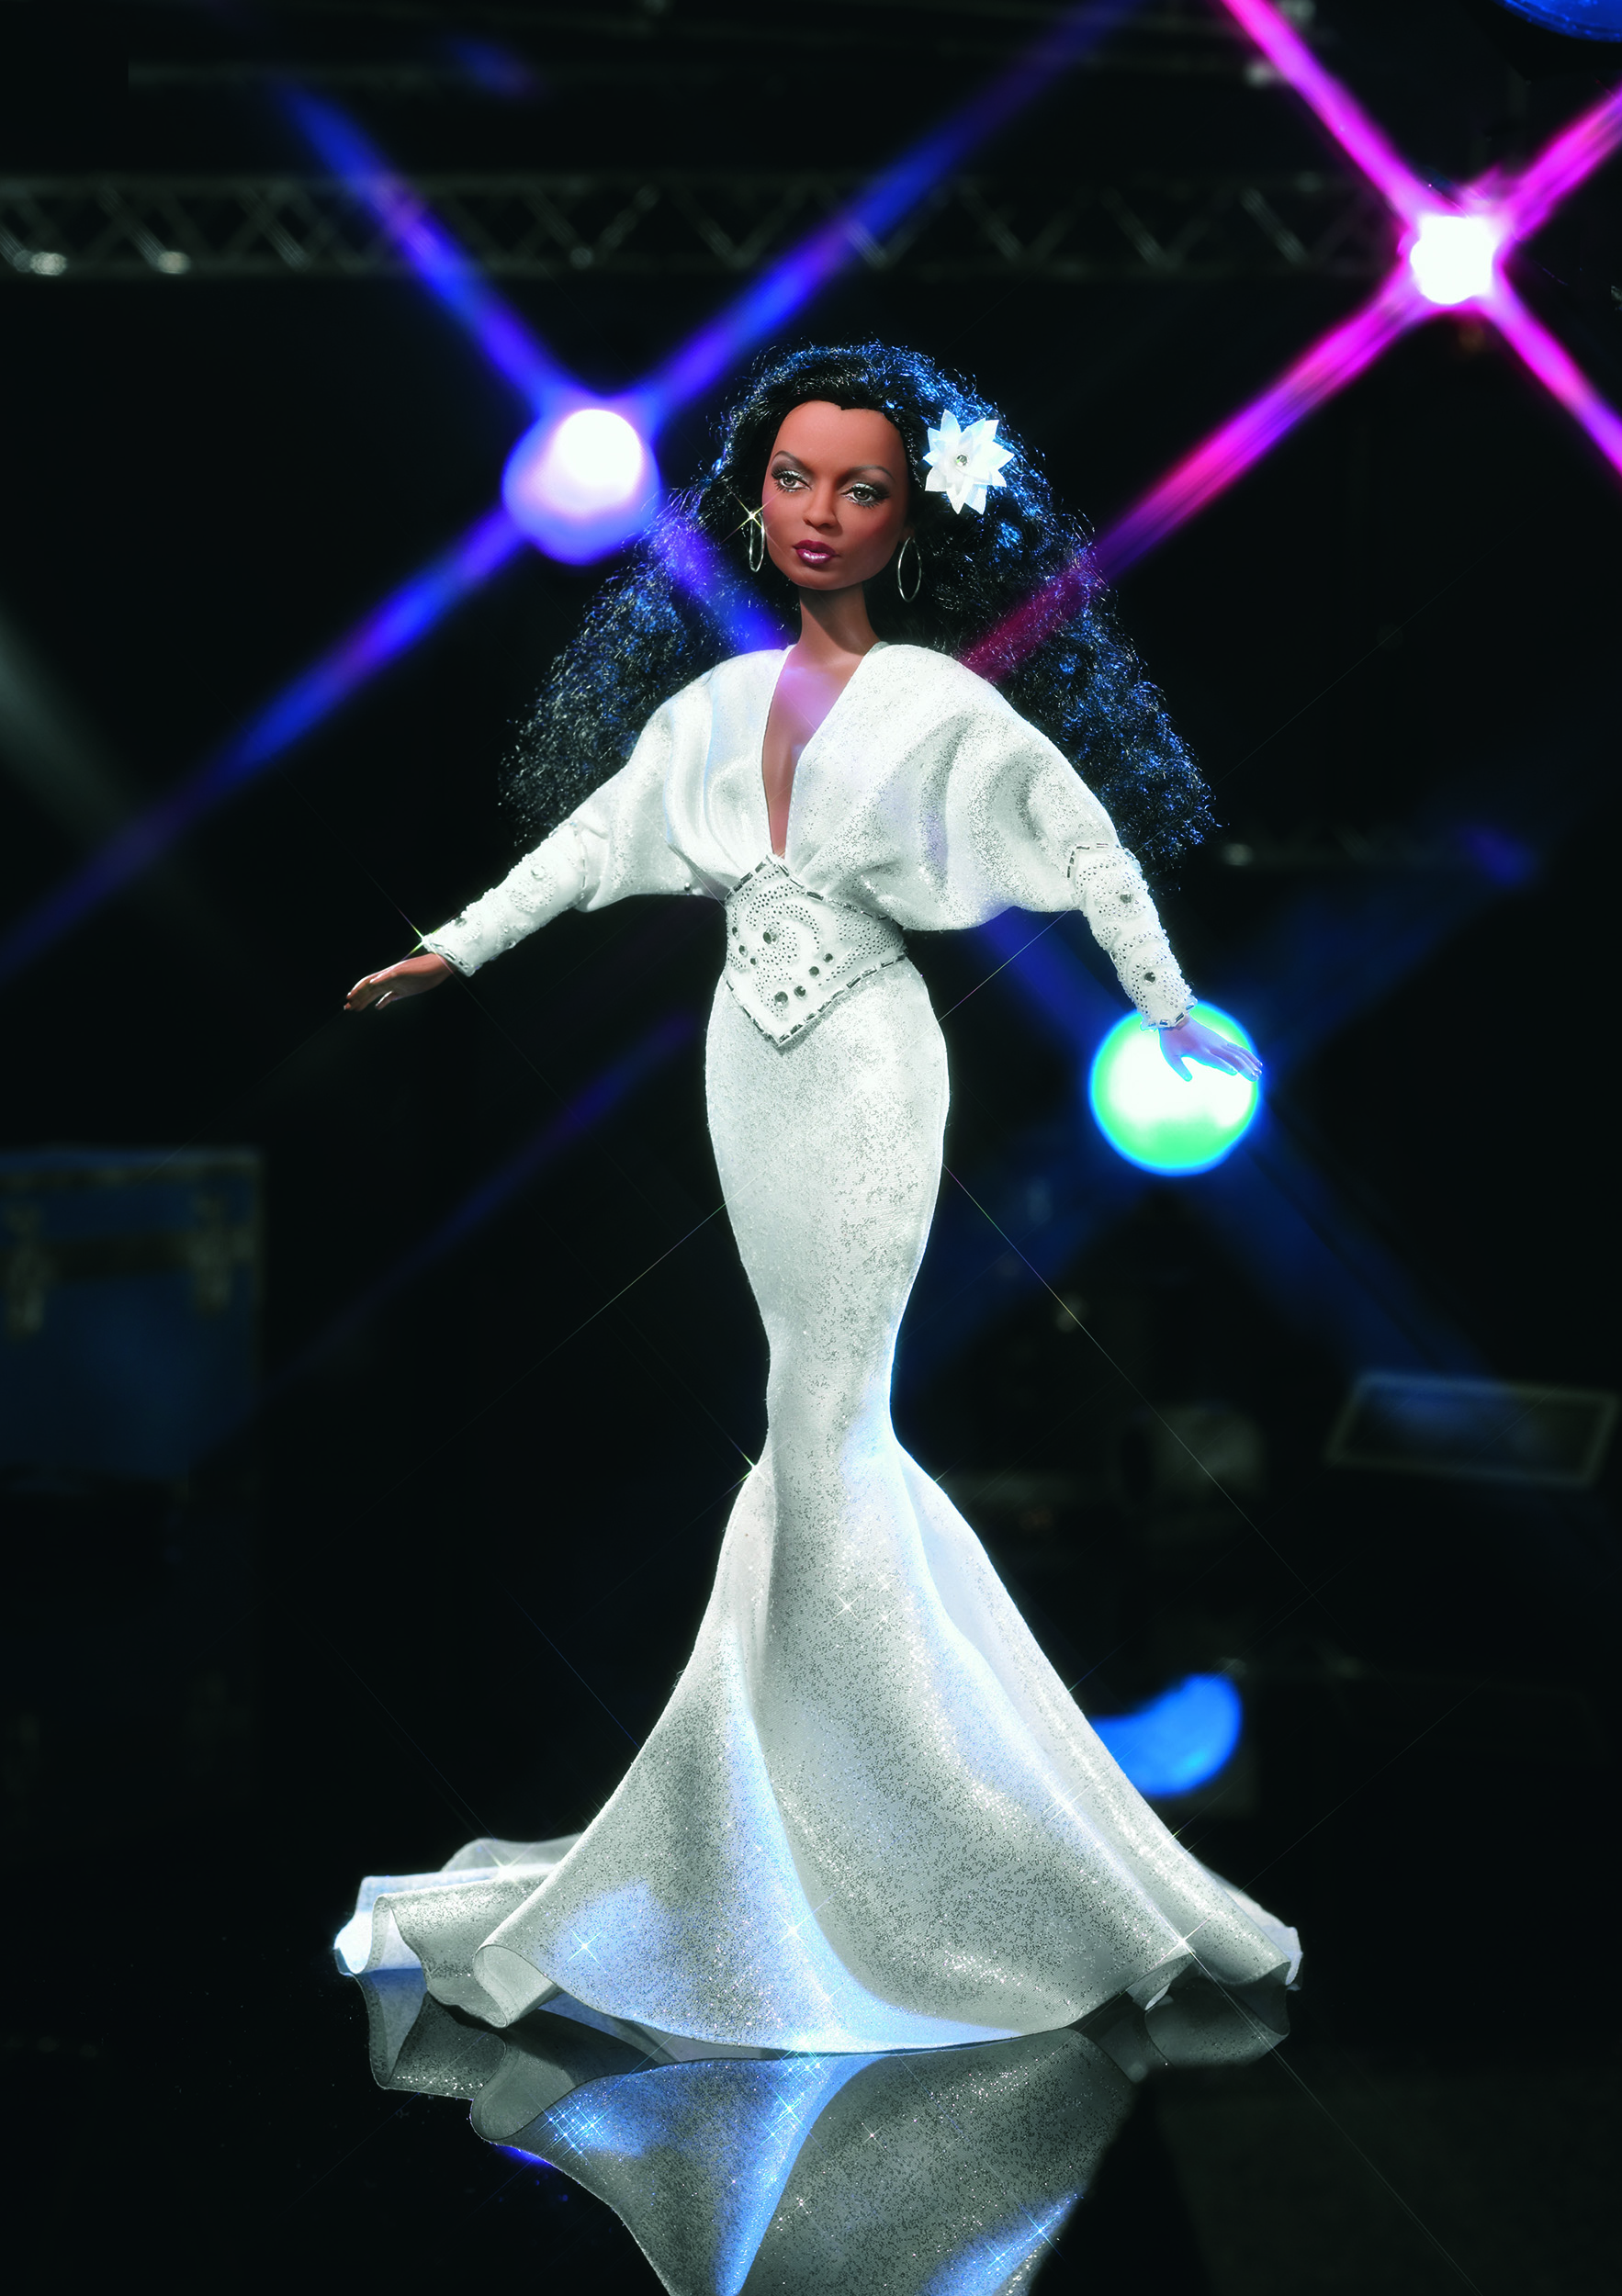 The Diana Ross Doll, released in 2003.